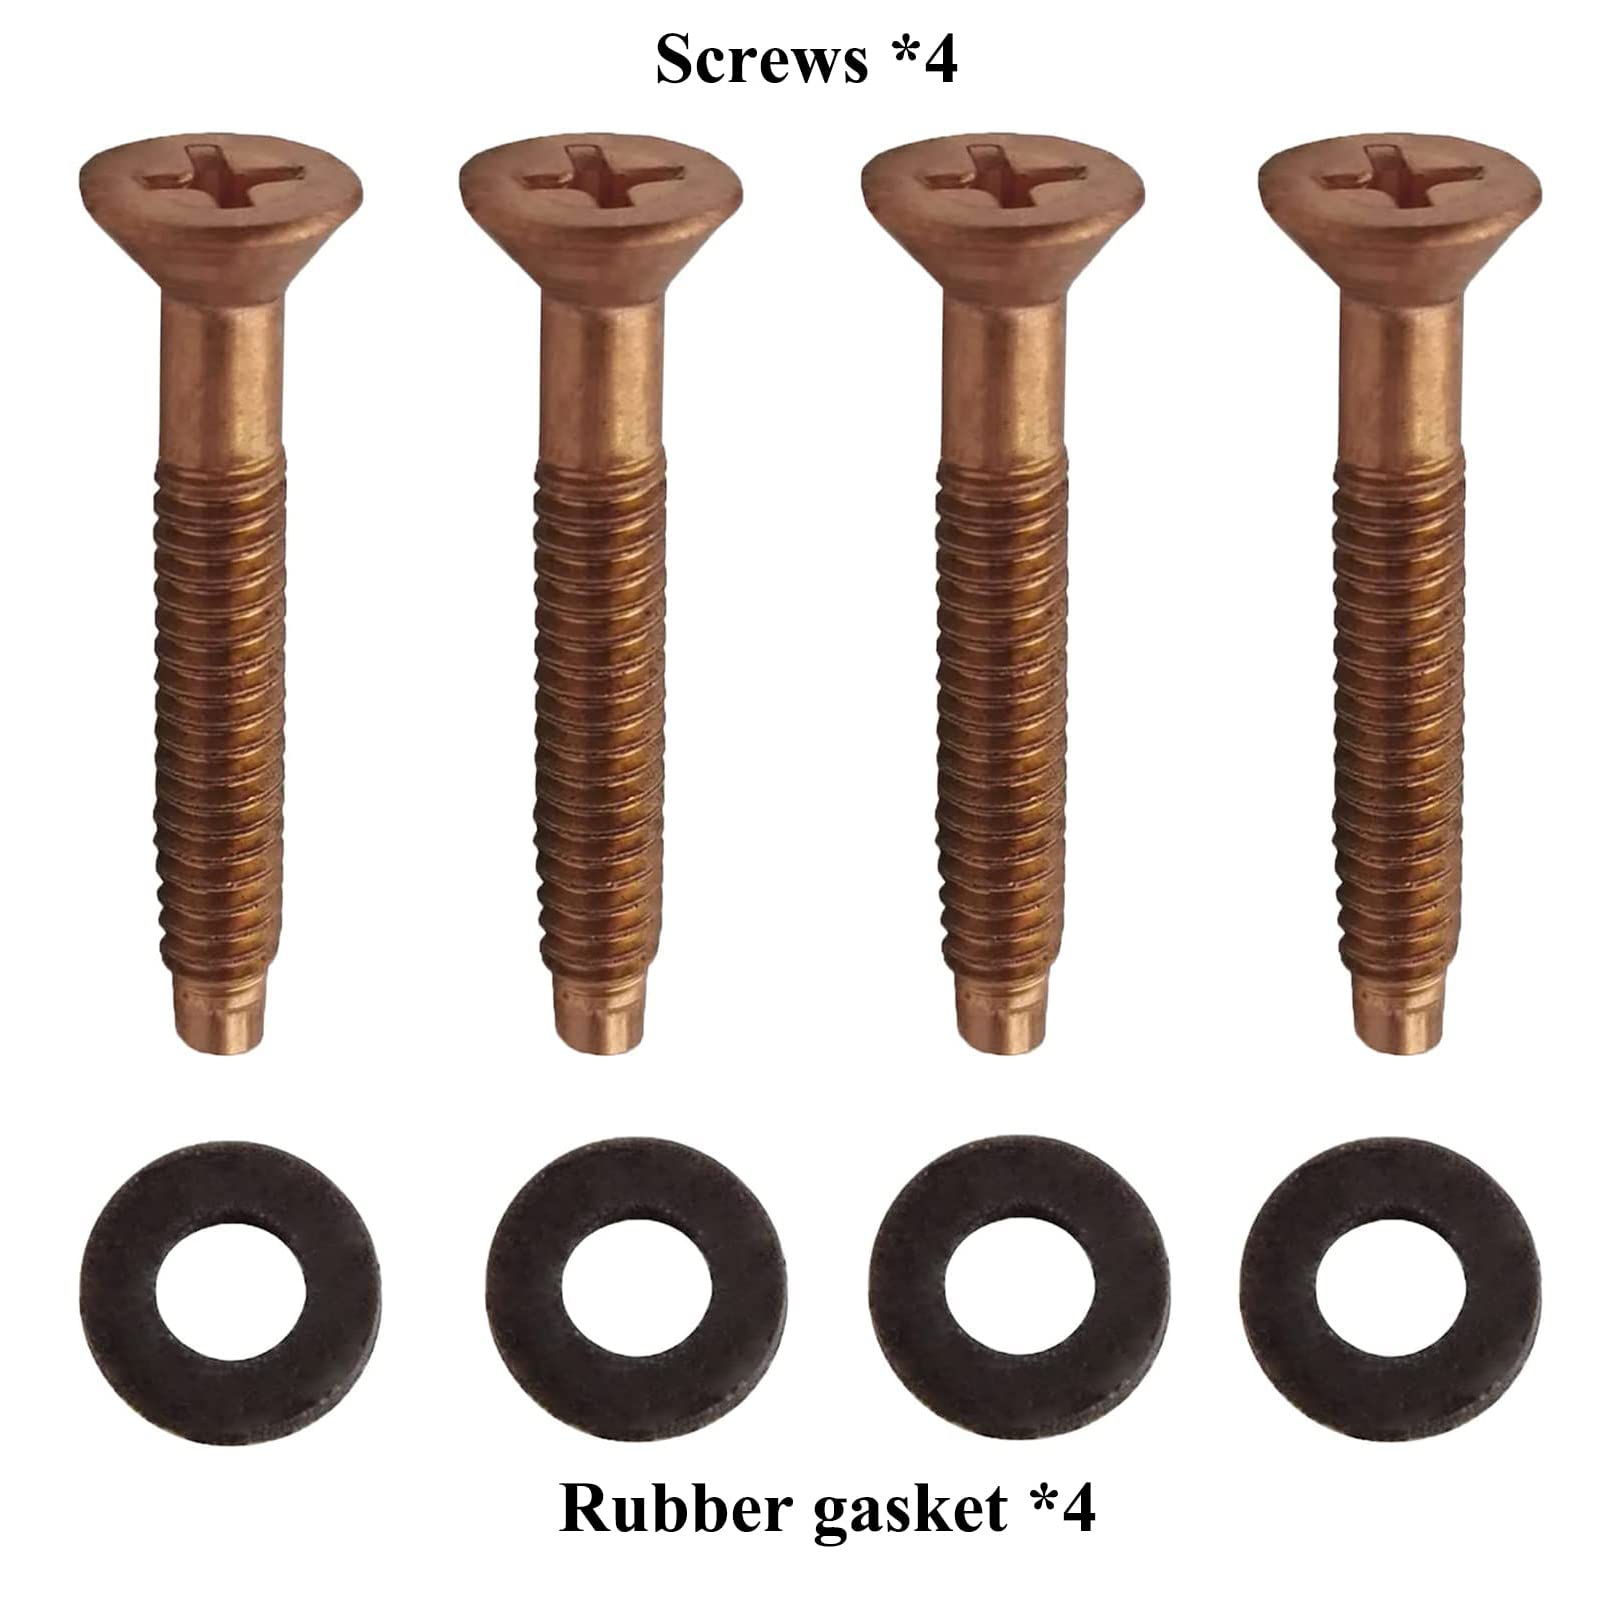 Zeiboat 4 Pack 79104800 Spa and Pool Light Screws with Gum Washers, Pool Screw Replacement